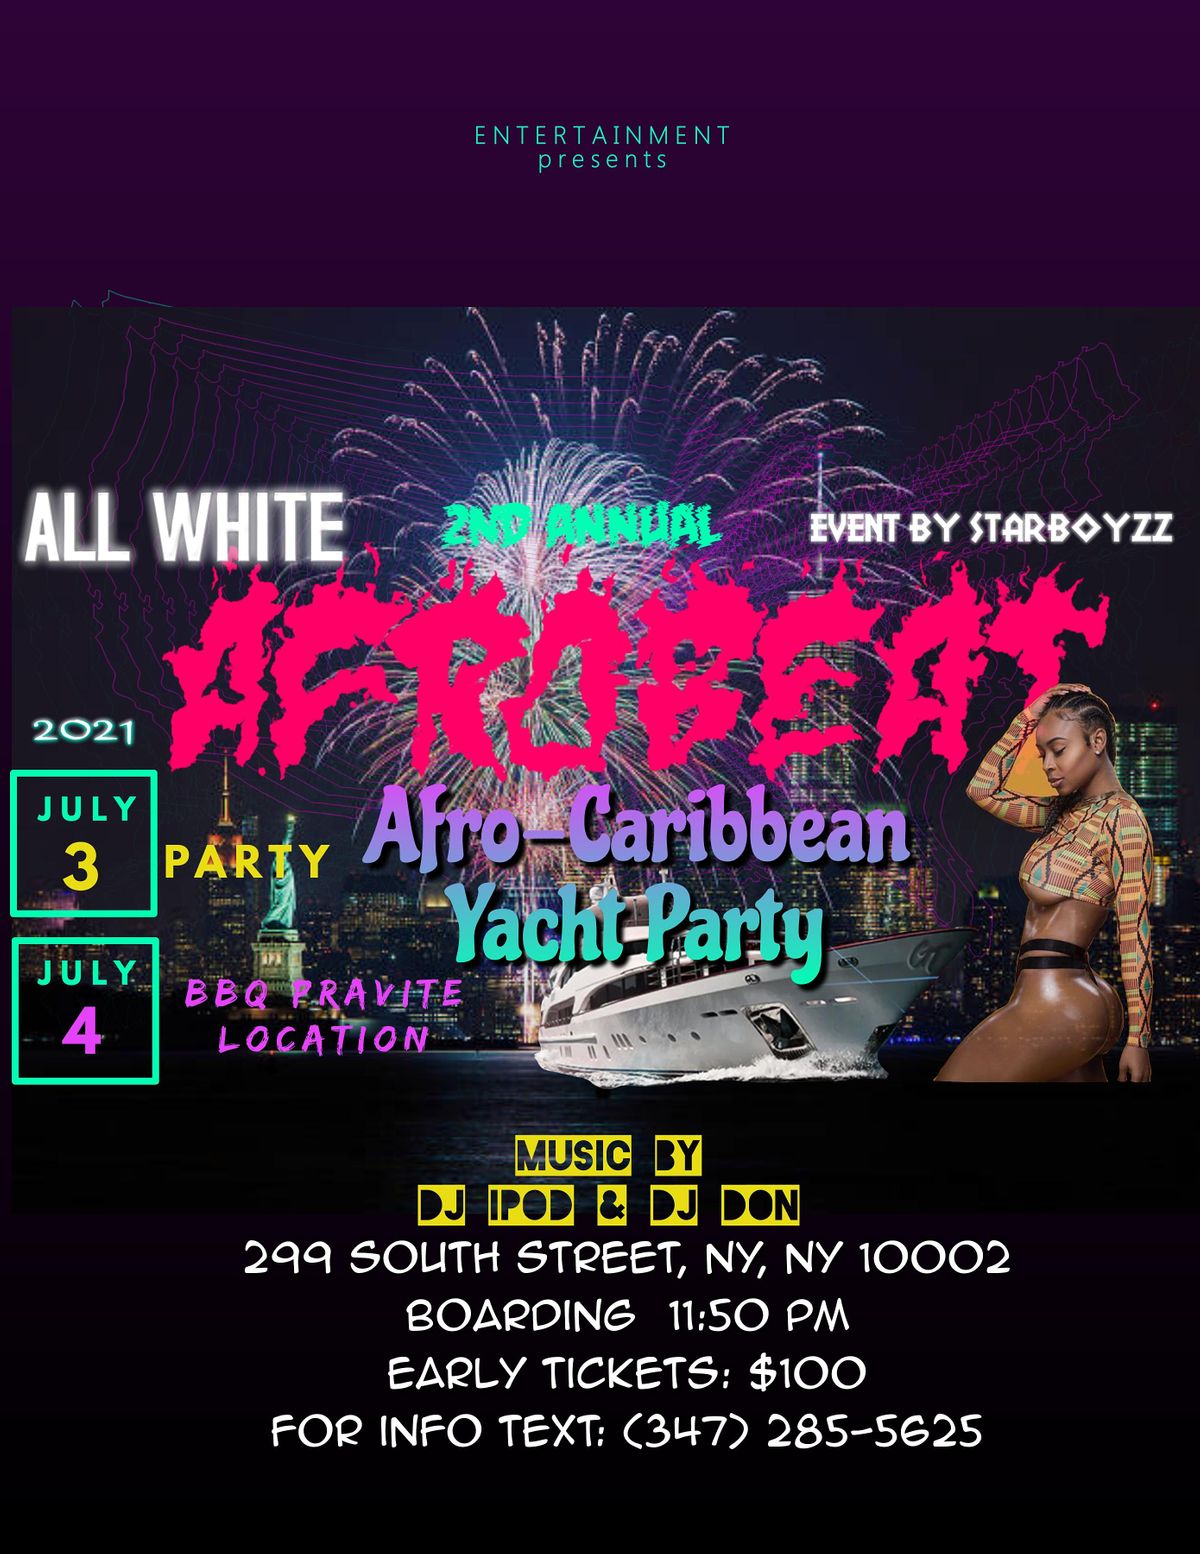 AFROBEAT YACHT PARTY